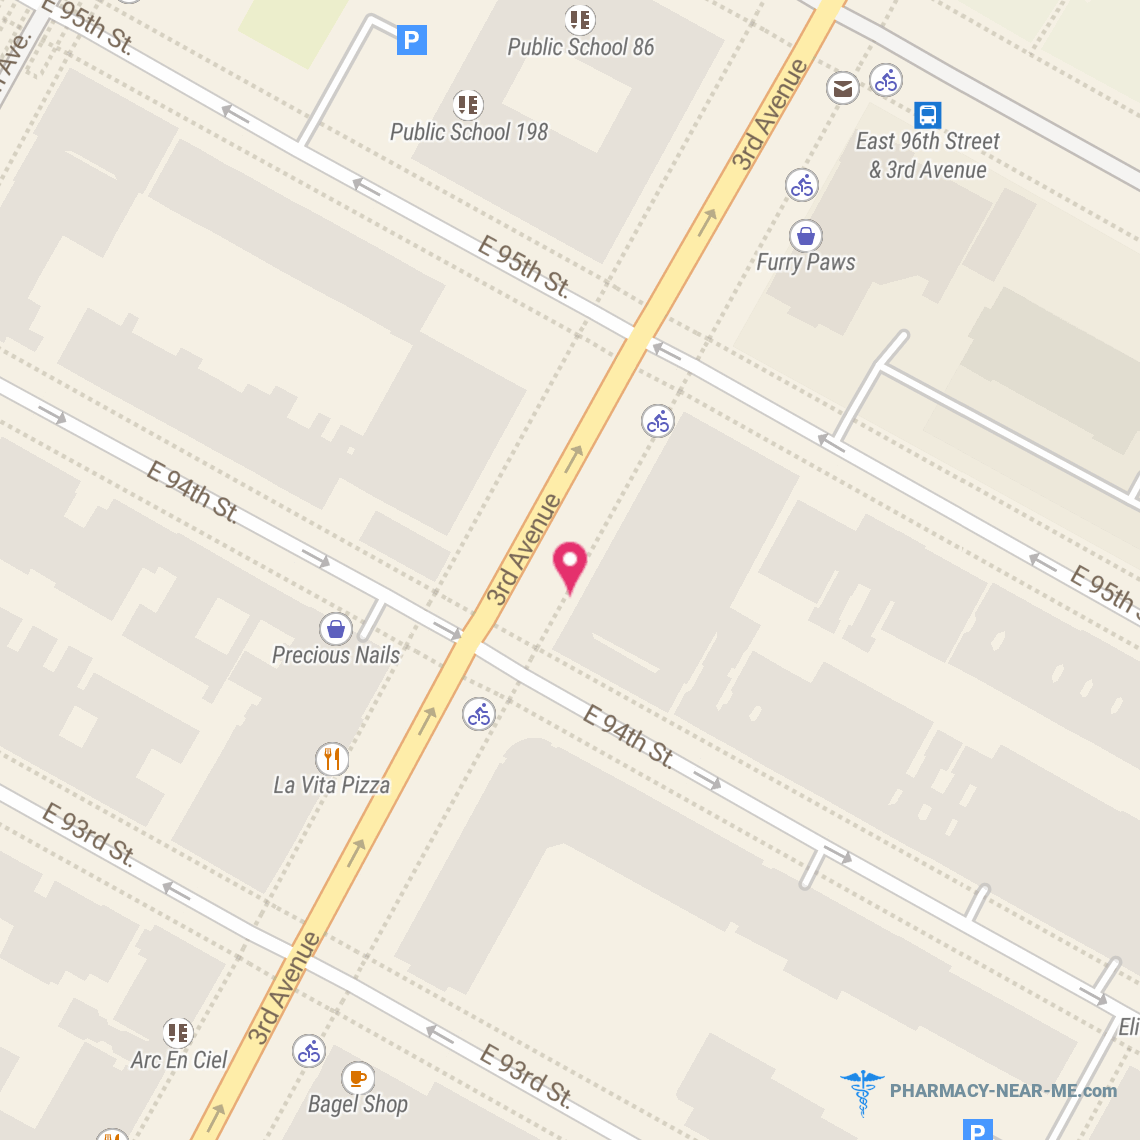 DUANE READE #14327 - Pharmacy Hours, Phone, Reviews & Information: 1675 3rd Avenue, NY, New York 10128, United States